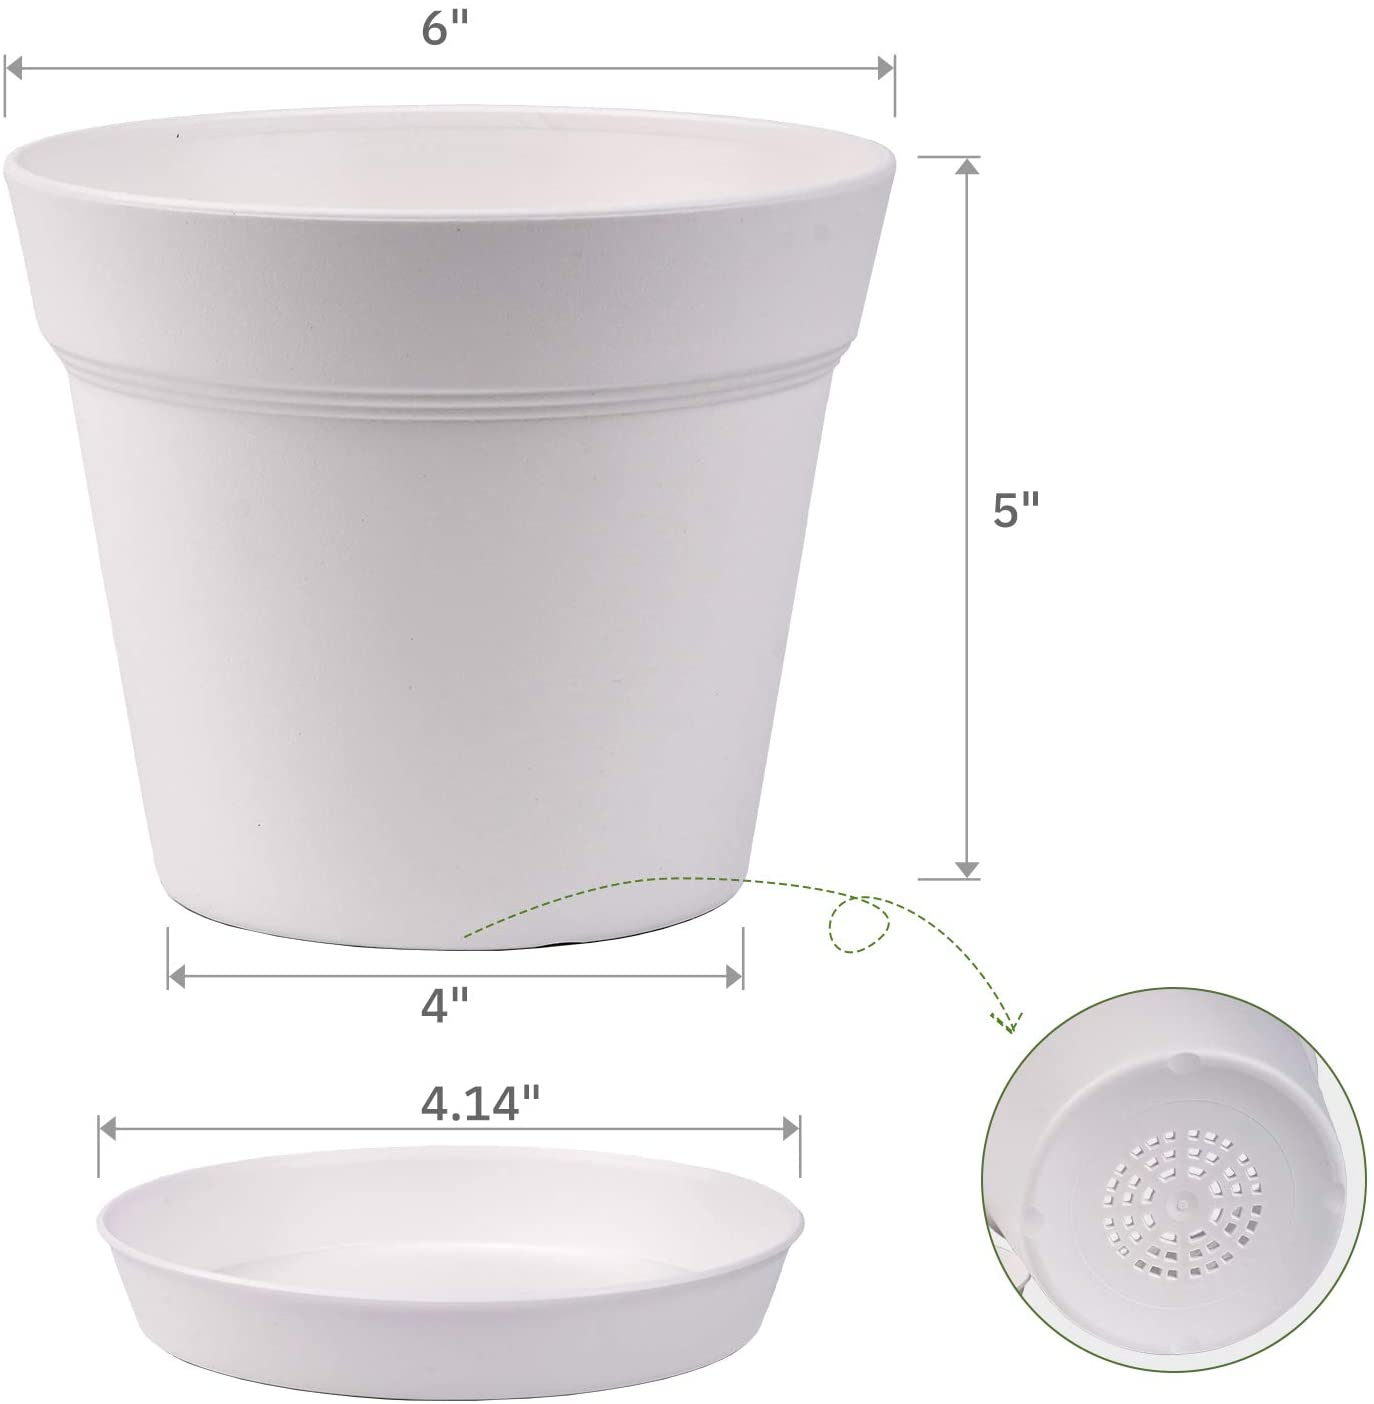 Plant Pots | 6" Plastic Pot with Drainage and Tray